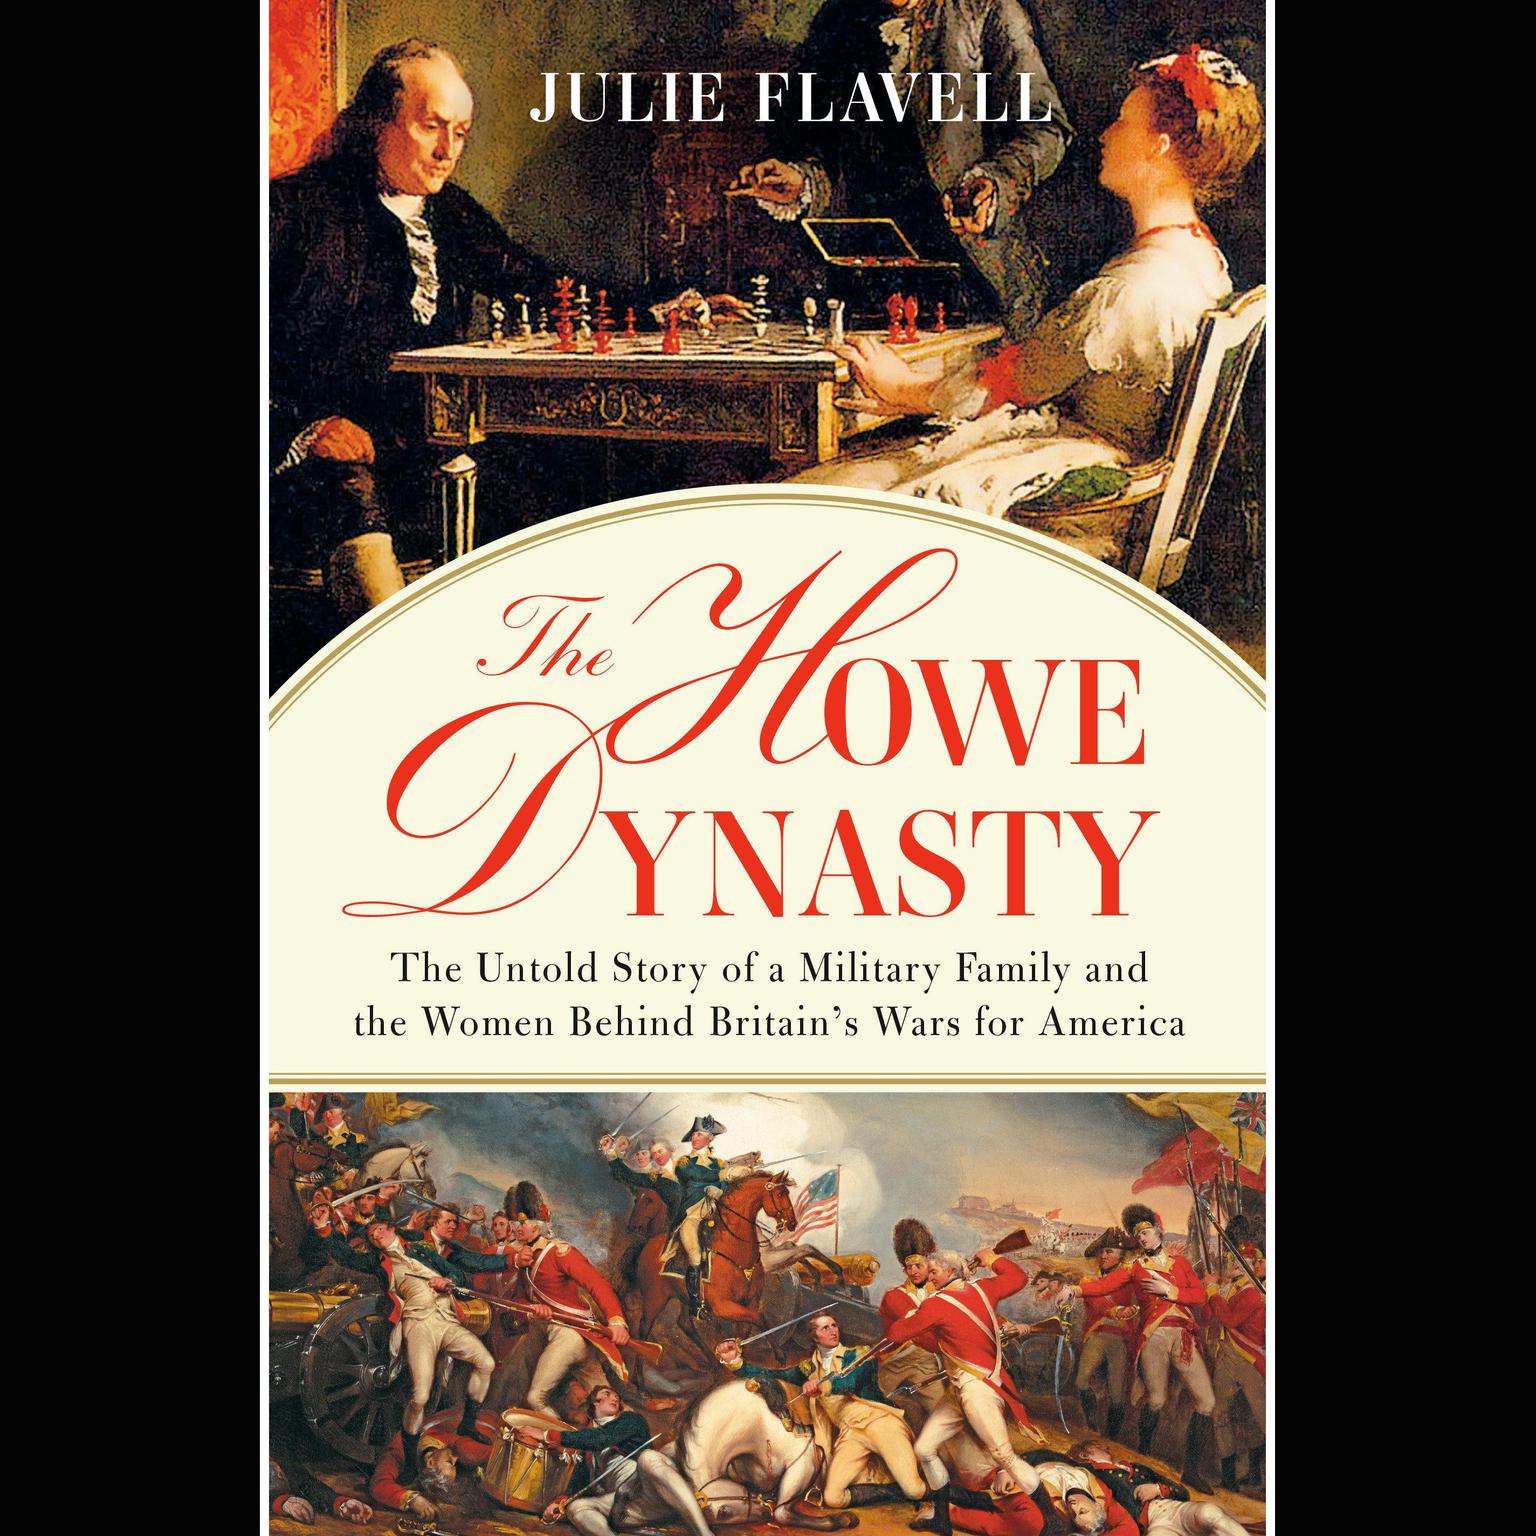 The Howe Dynasty: The Untold Story of a Military Family and the Women Behind Britains Wars for America Audiobook, by Julie Flavell